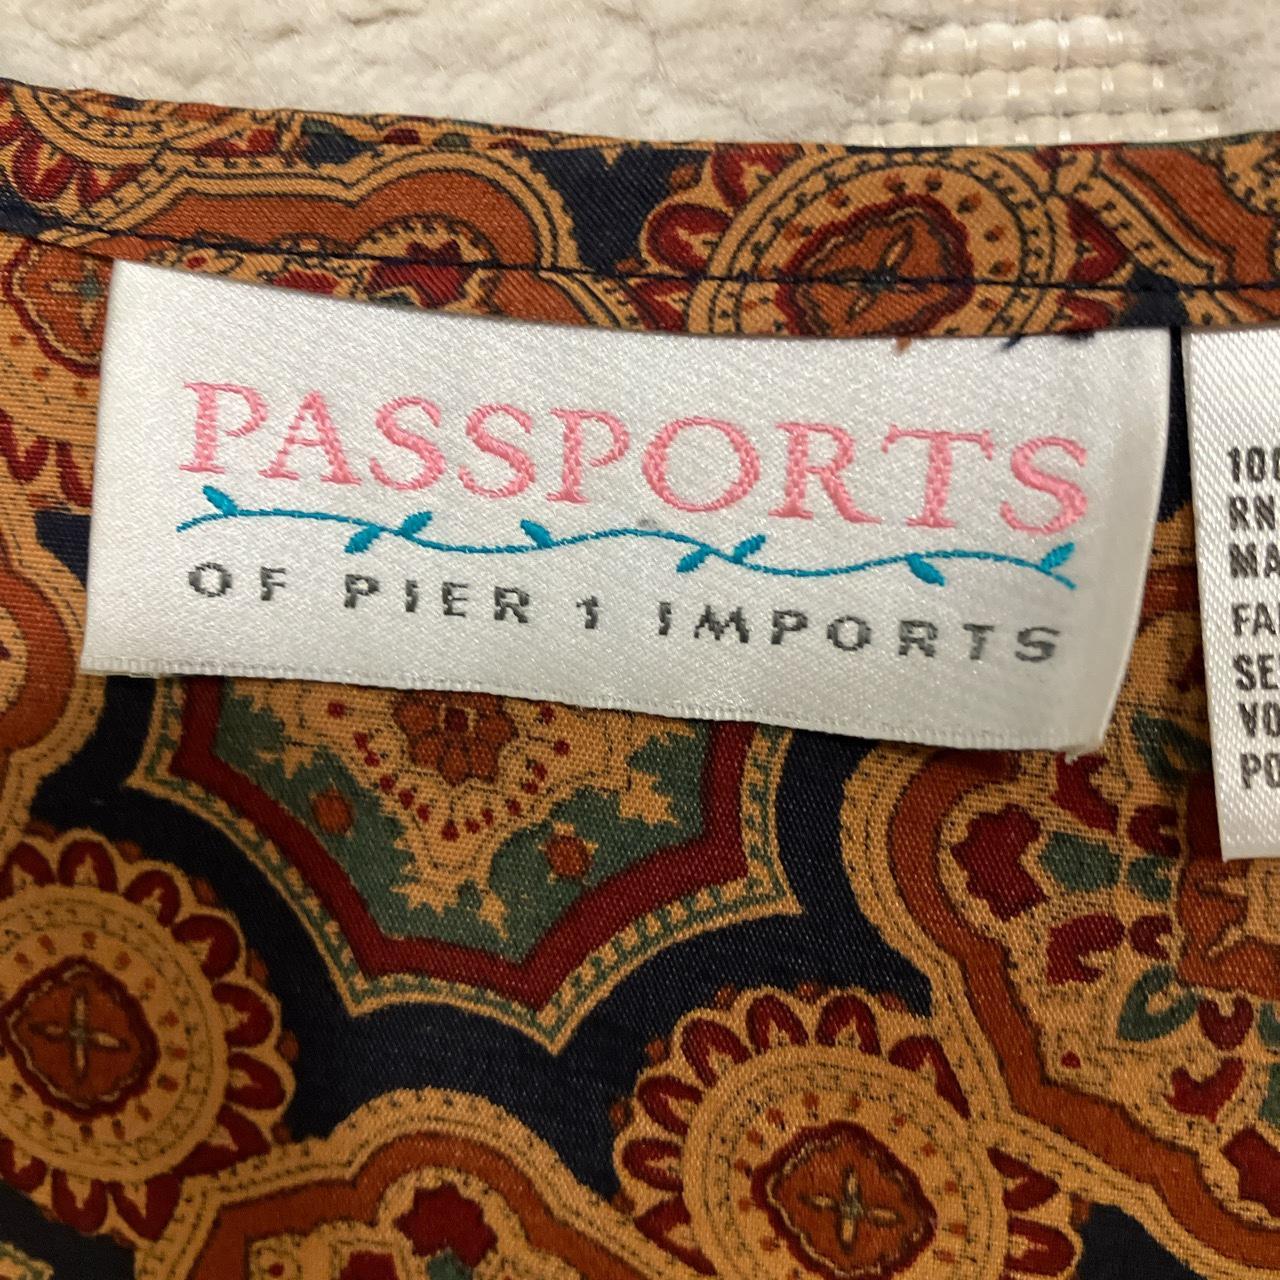 Product Image 2 - Vintage Passports of Pier 1